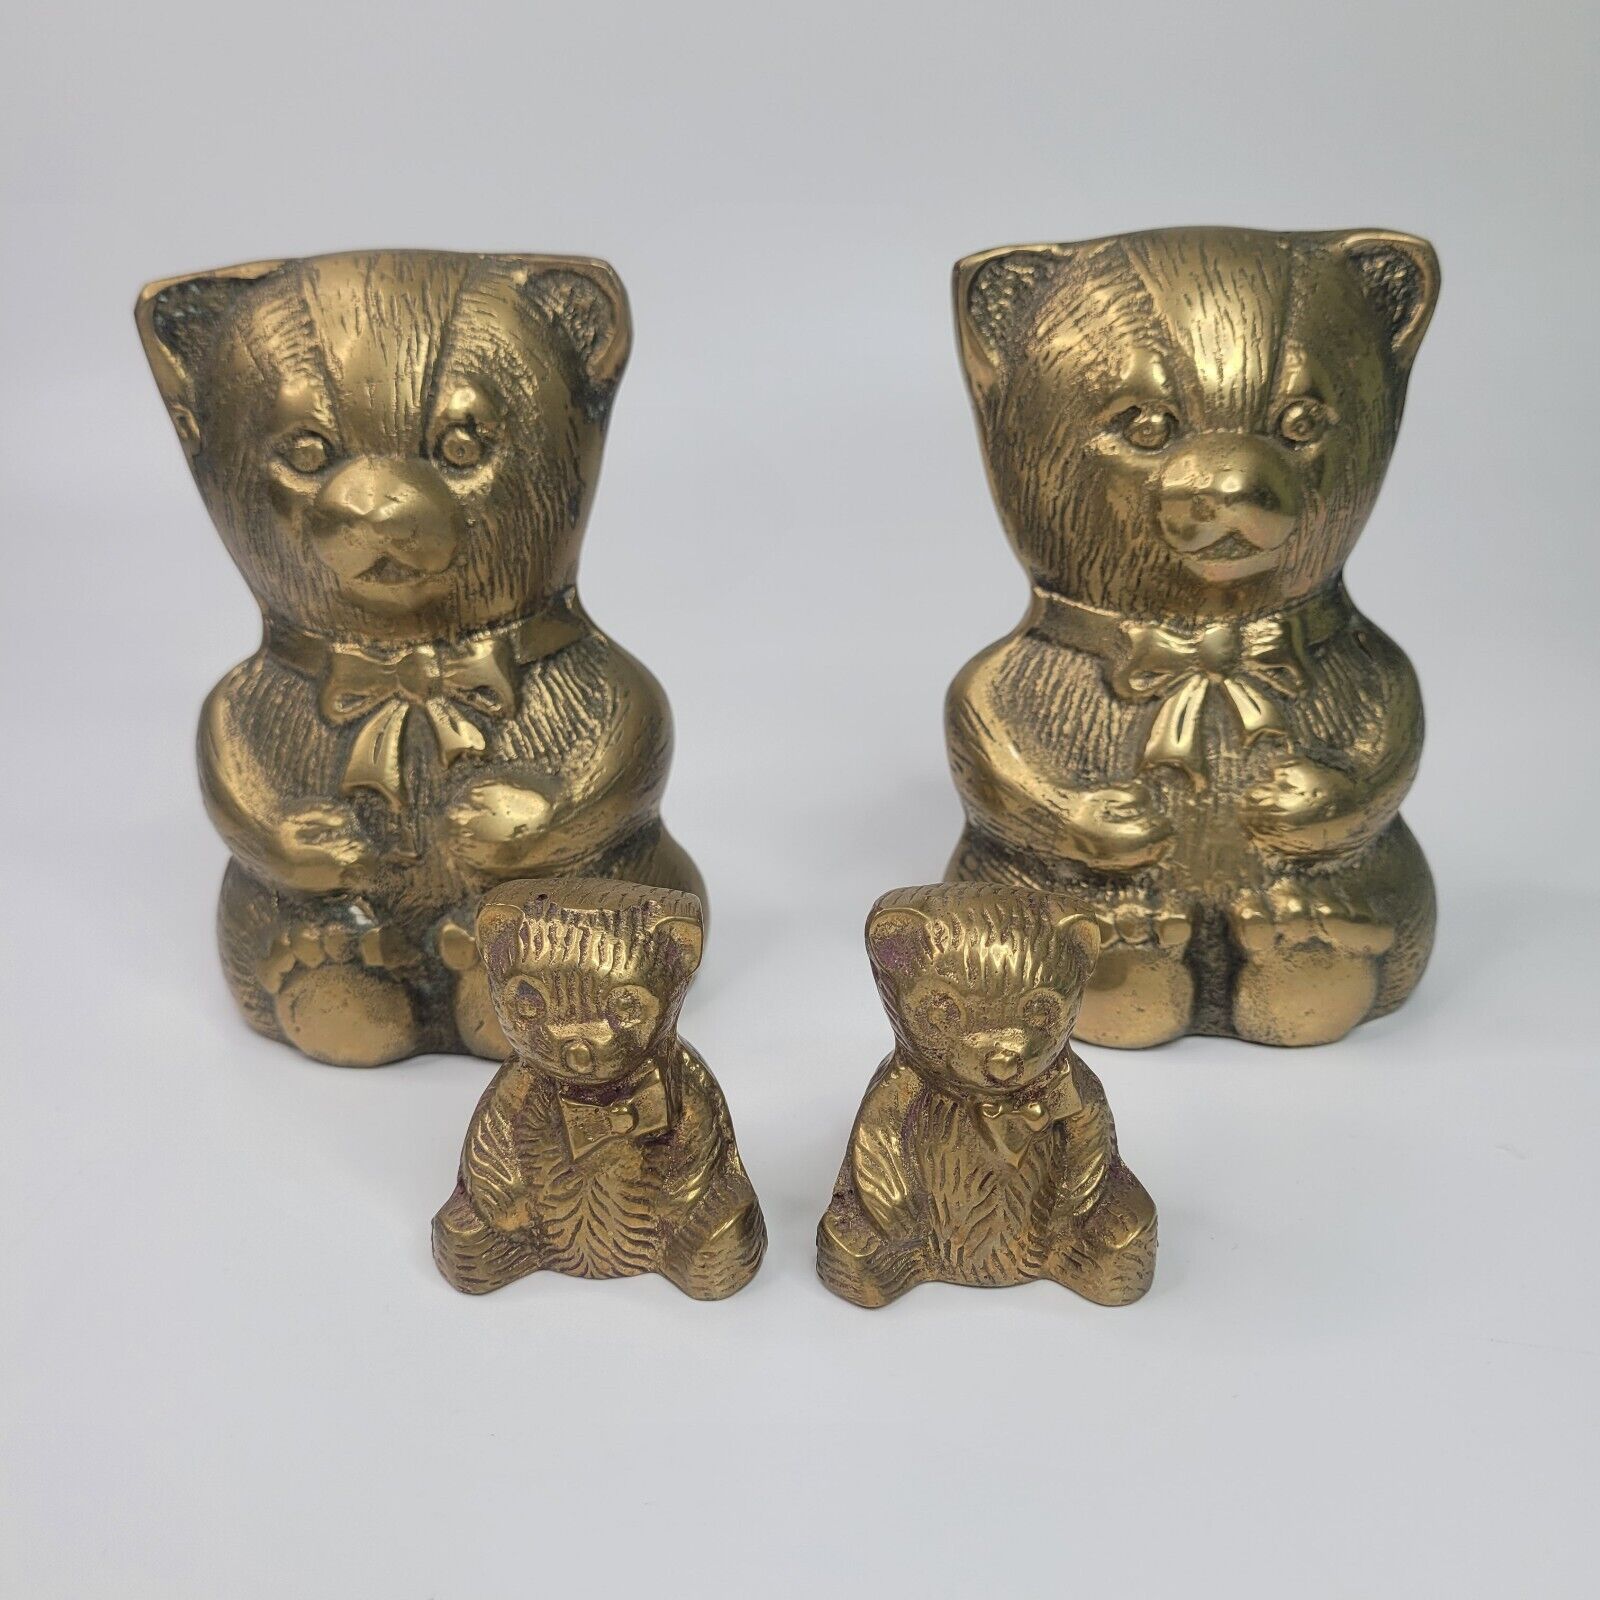 Teddy Bear Collection Brass Money Banks Figurines Vintage MCM 60s 70s Set Of 4